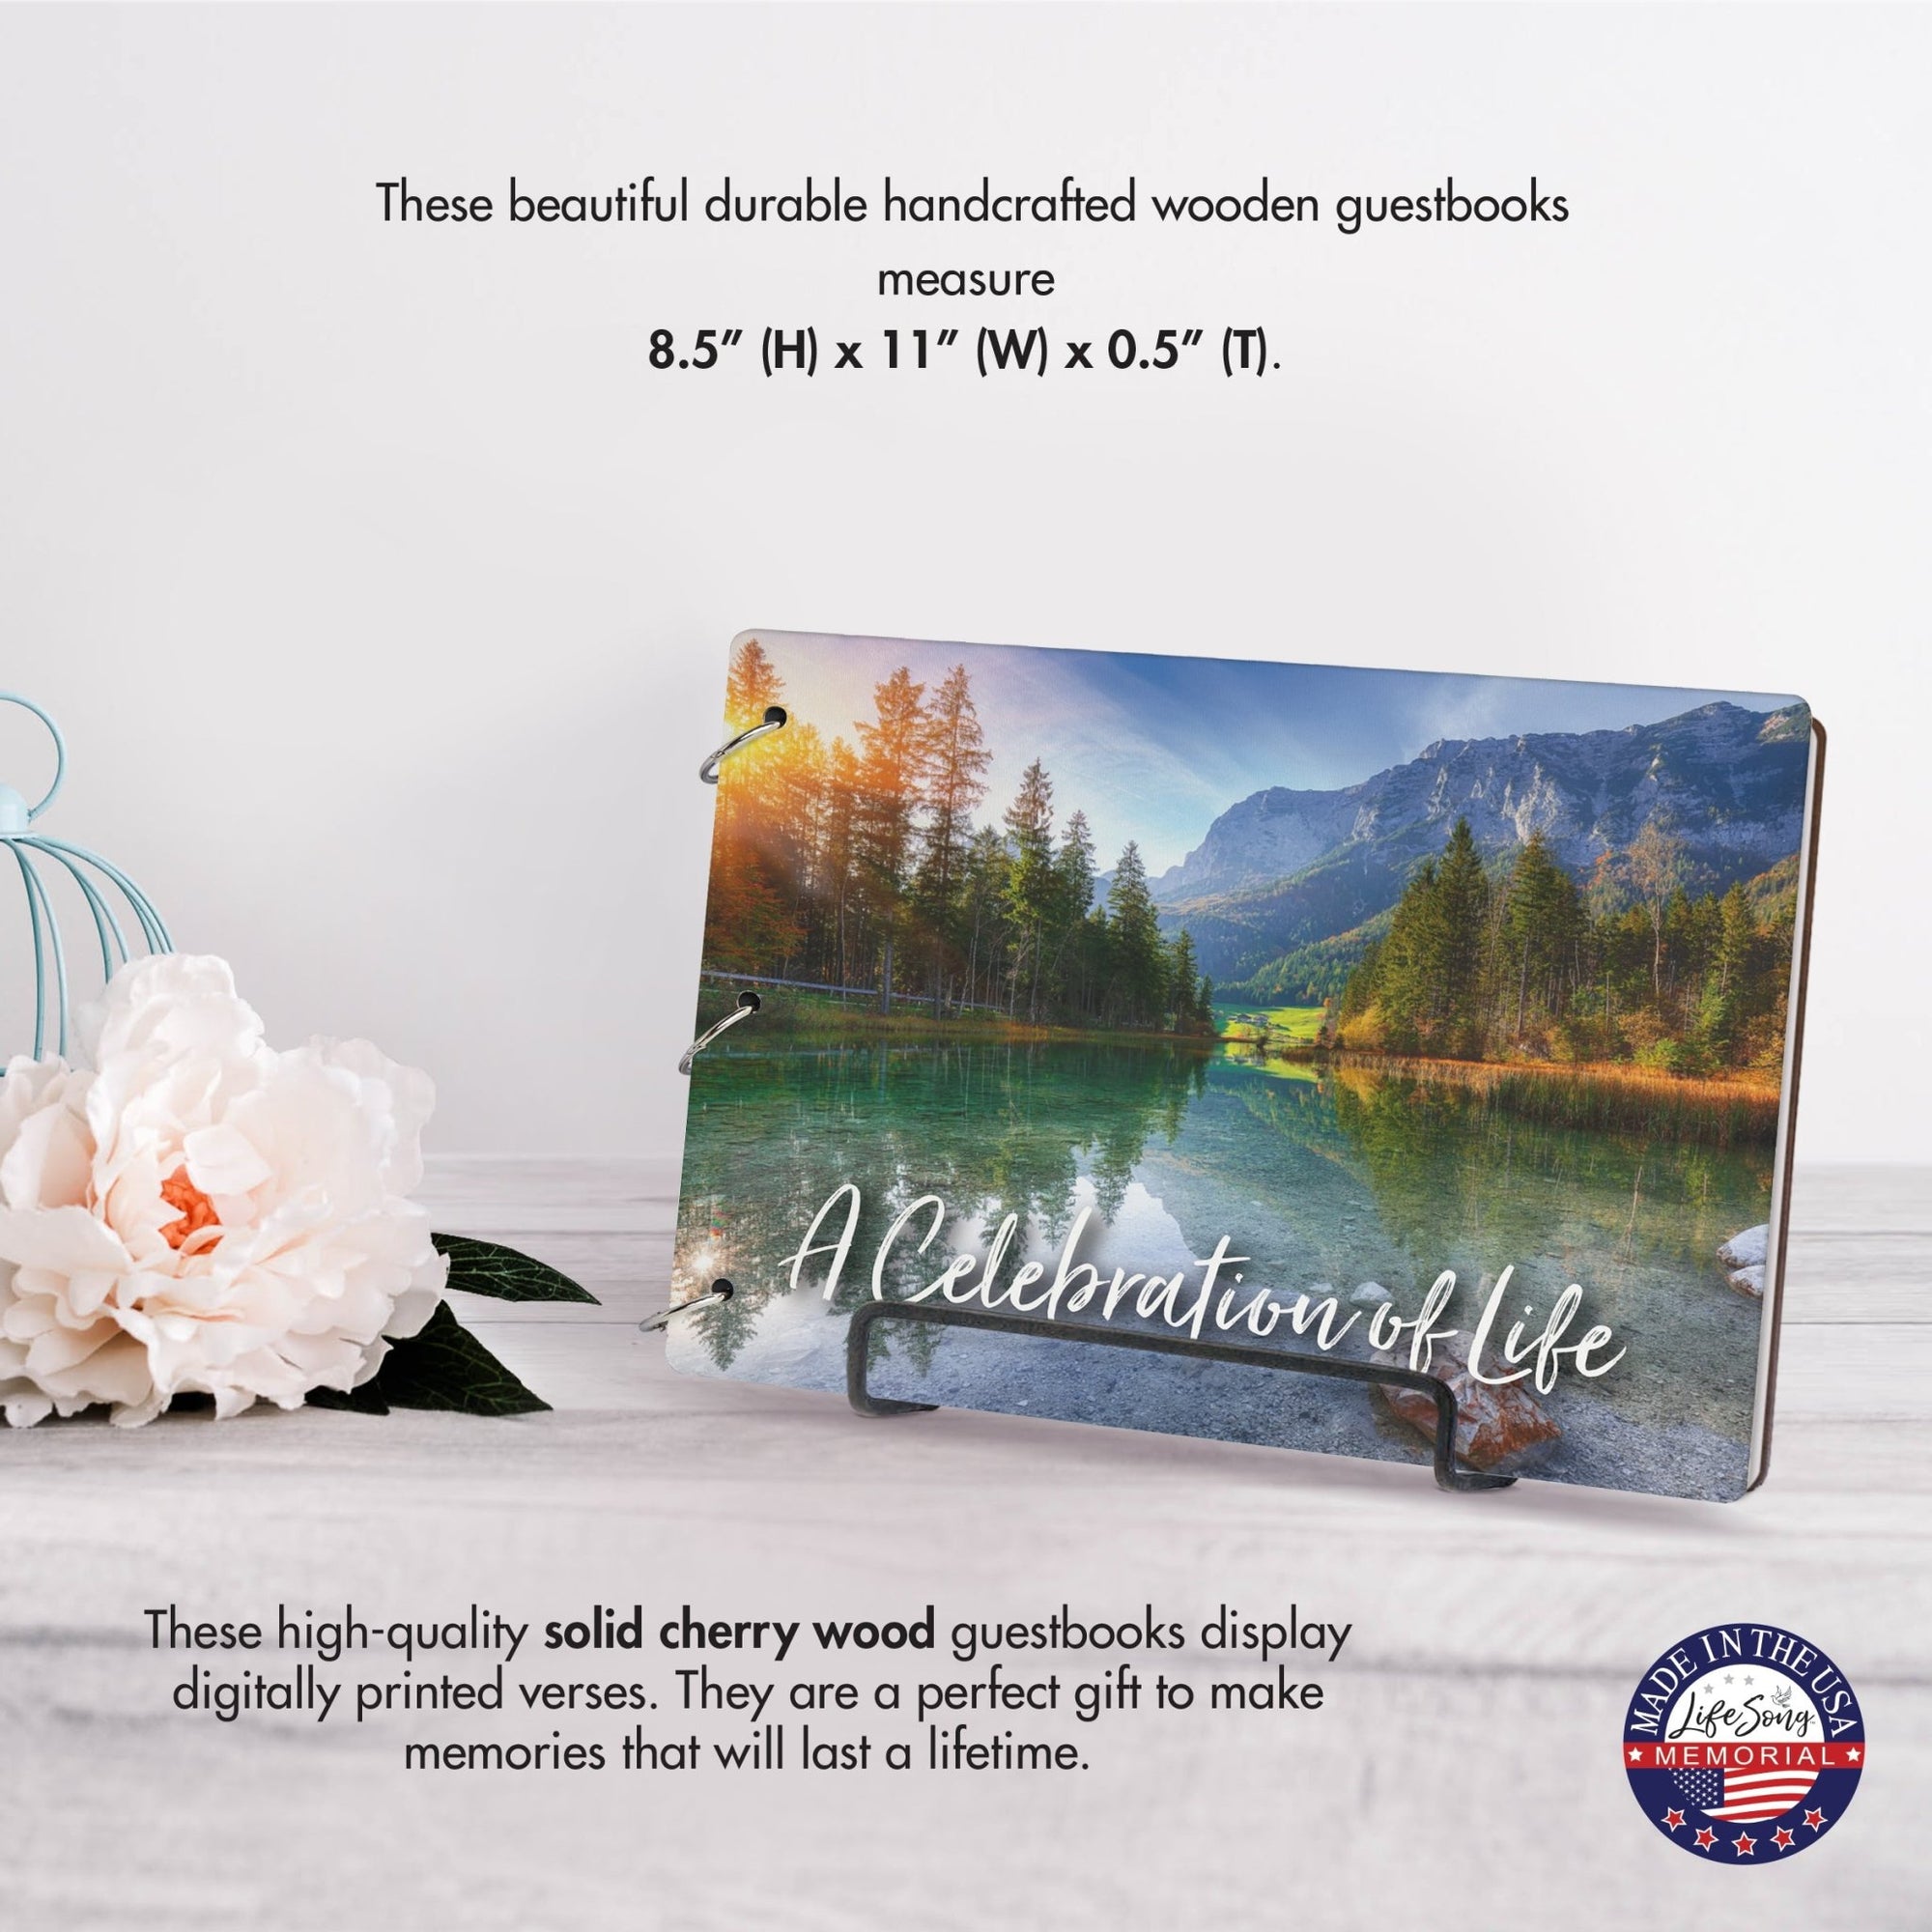 Celebration Of Life Funeral Guest Books For Memorial Services Registry With Wooden Cover - LifeSong Milestones